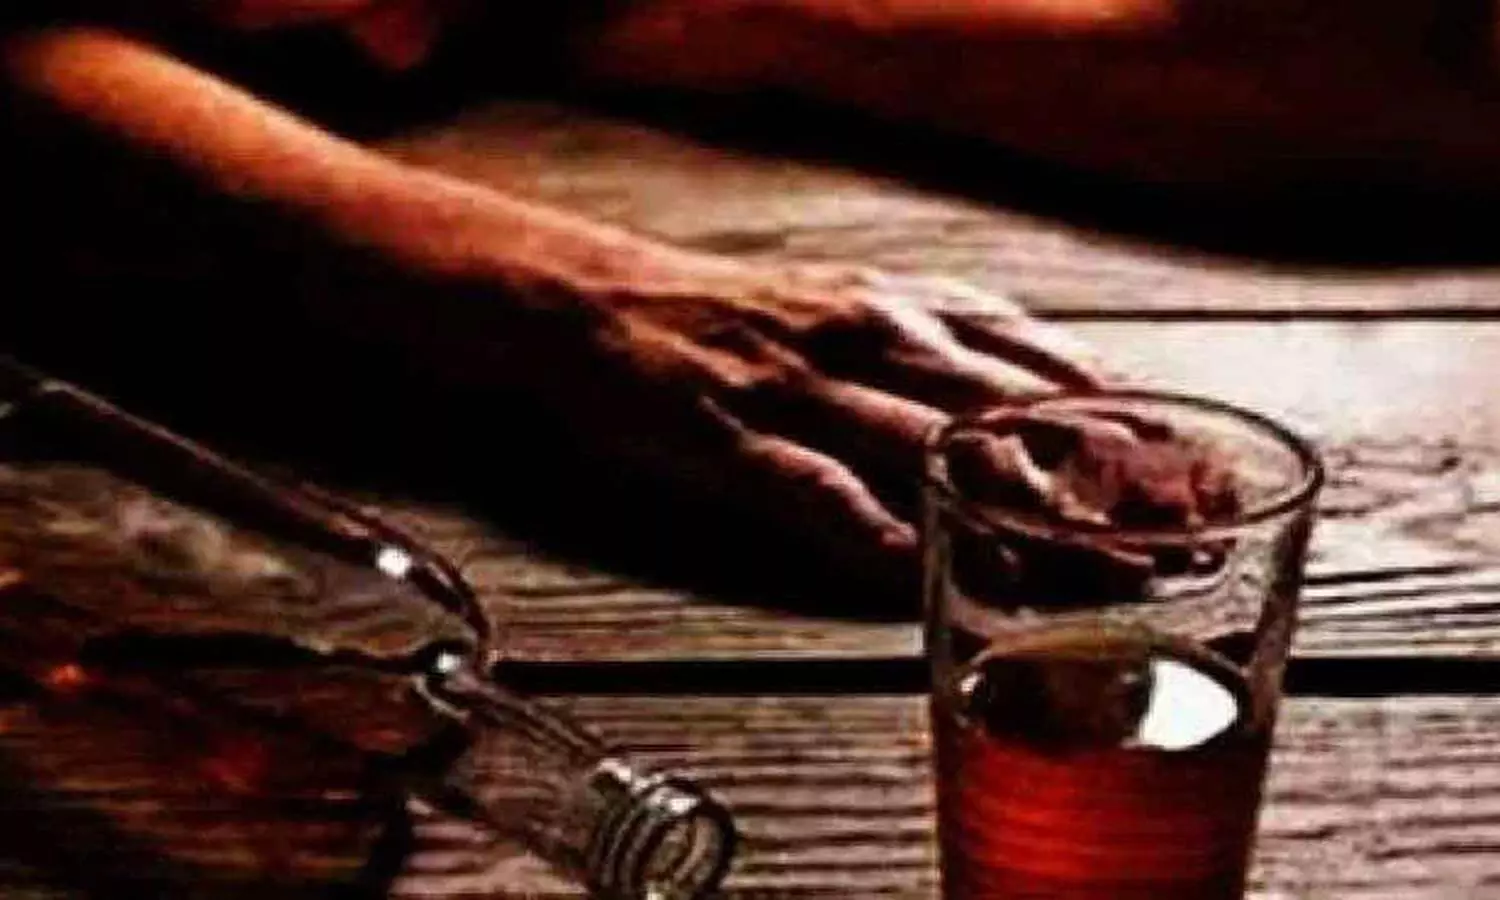 5 killed by drinking poisonous liquor